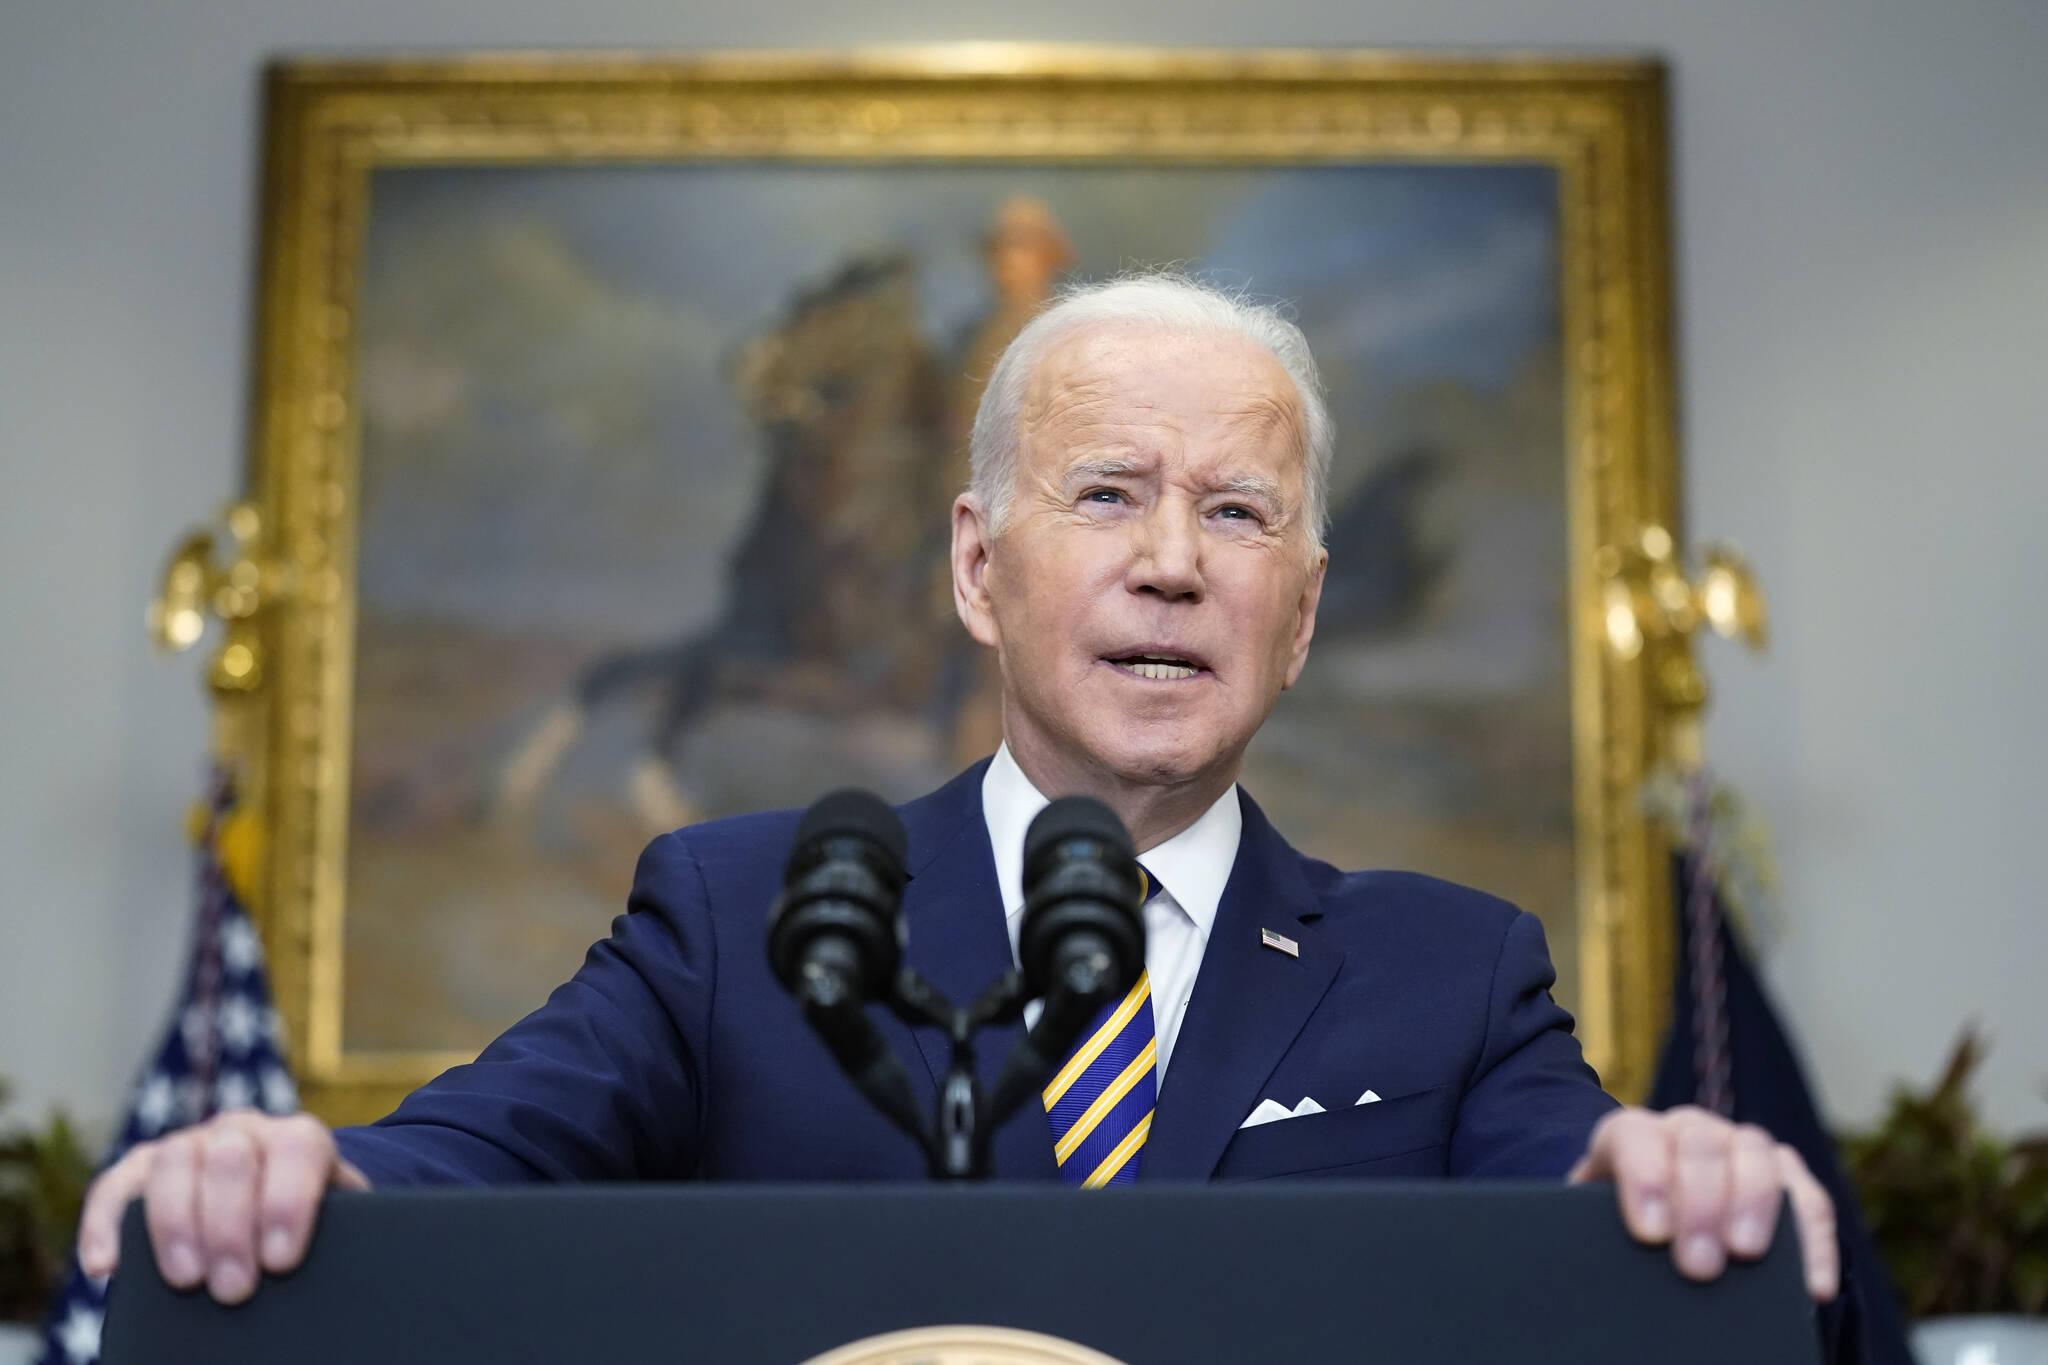 President Joe Biden announces a ban on Russian oil imports, toughening the toll on Russia’s economy in retaliation for its invasion of Ukraine, Tuesday, March 8, 2022, in the Roosevelt Room at the White House in Washington. (AP Photo / Andrew Harnik)